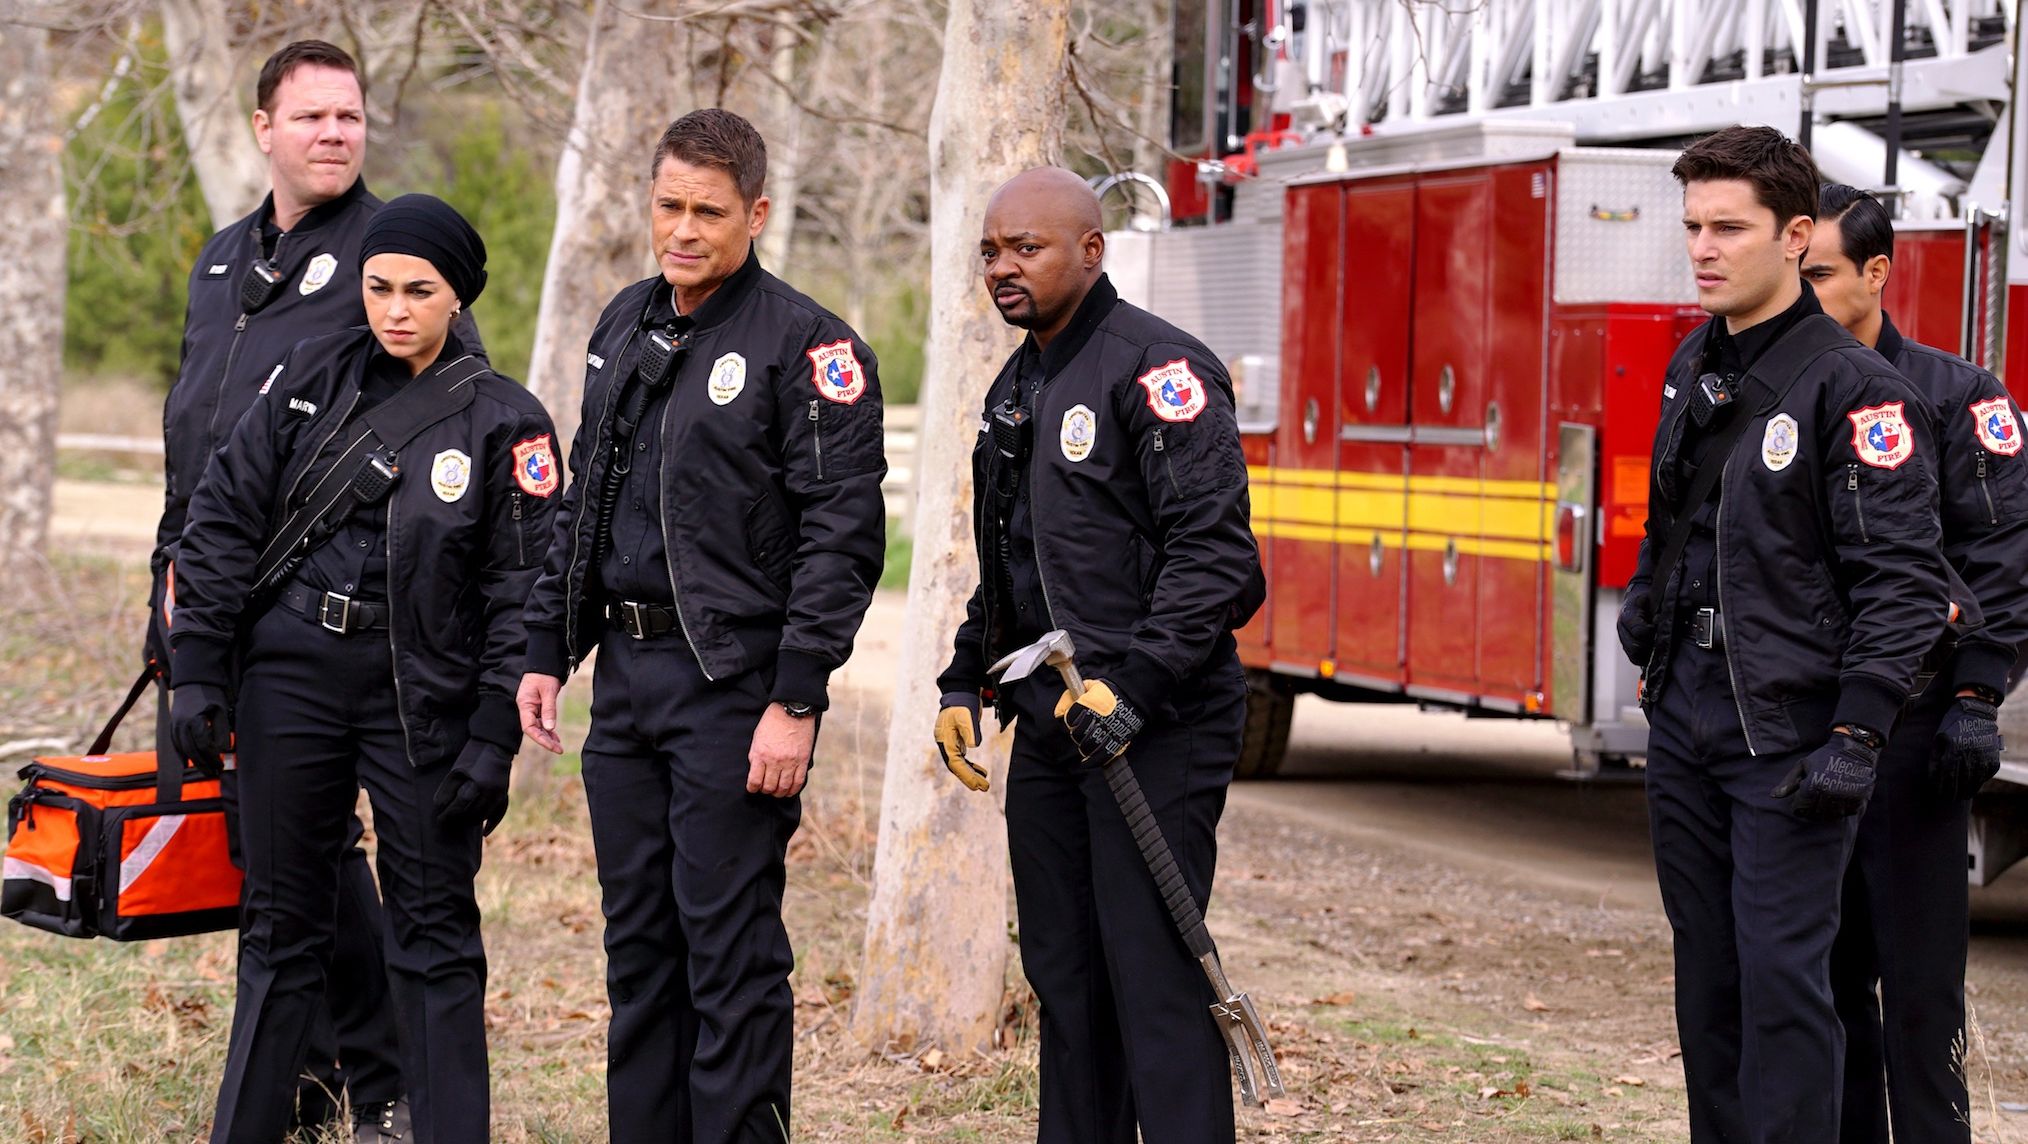 When Will "9-1-1: Lone Star S4 Episode 1" Be Released on Fox?